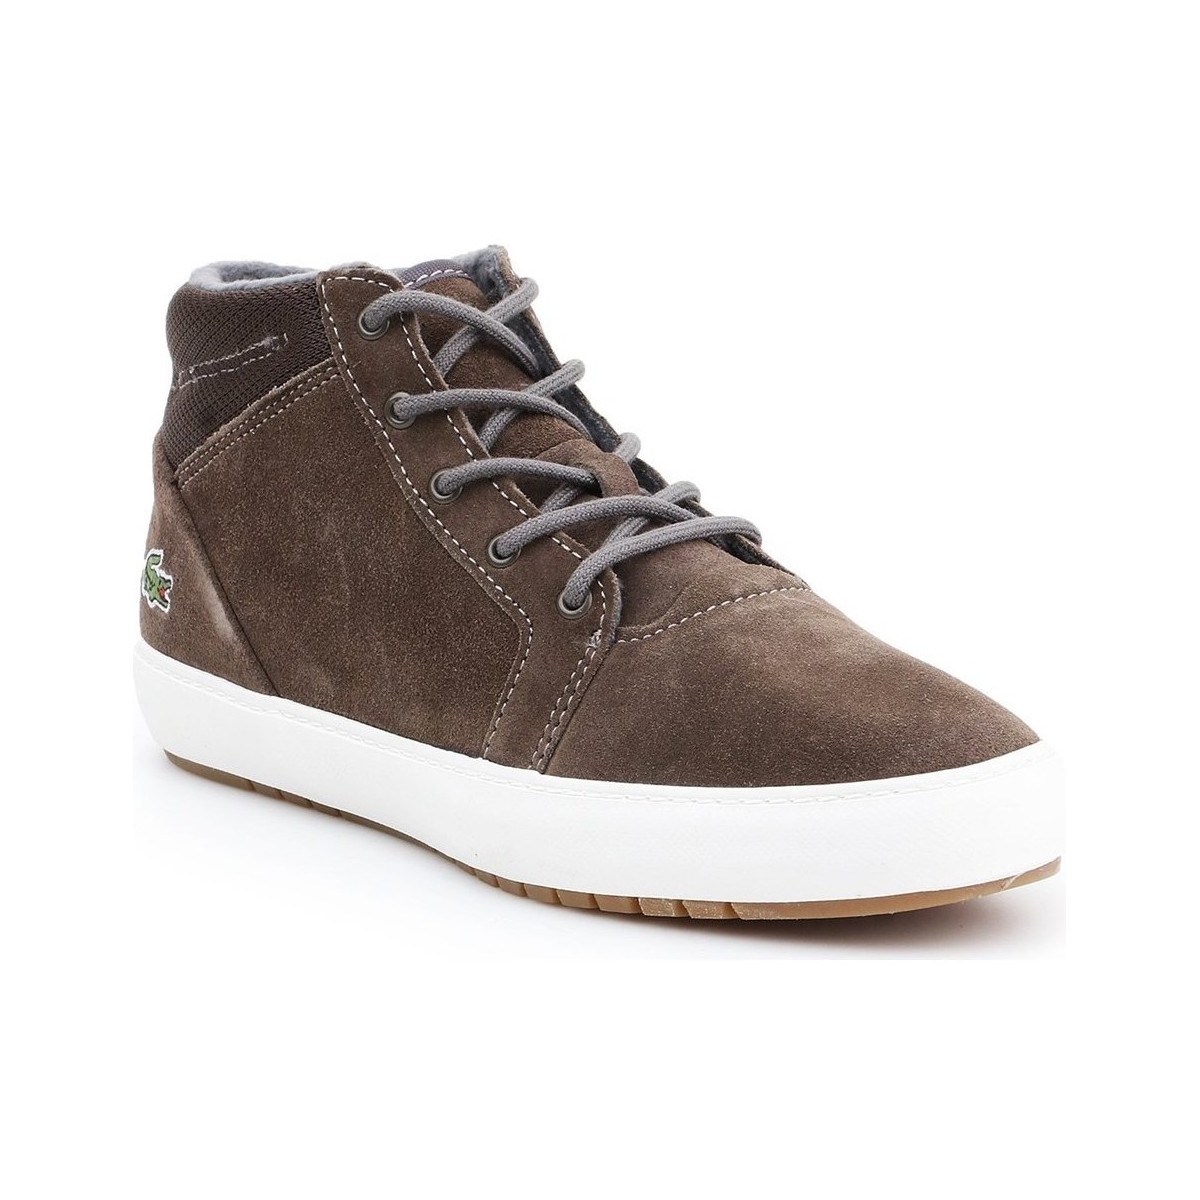 Chaussures Femme Boots Lacoste Ampthill Chukka 417 1 Caw Marron